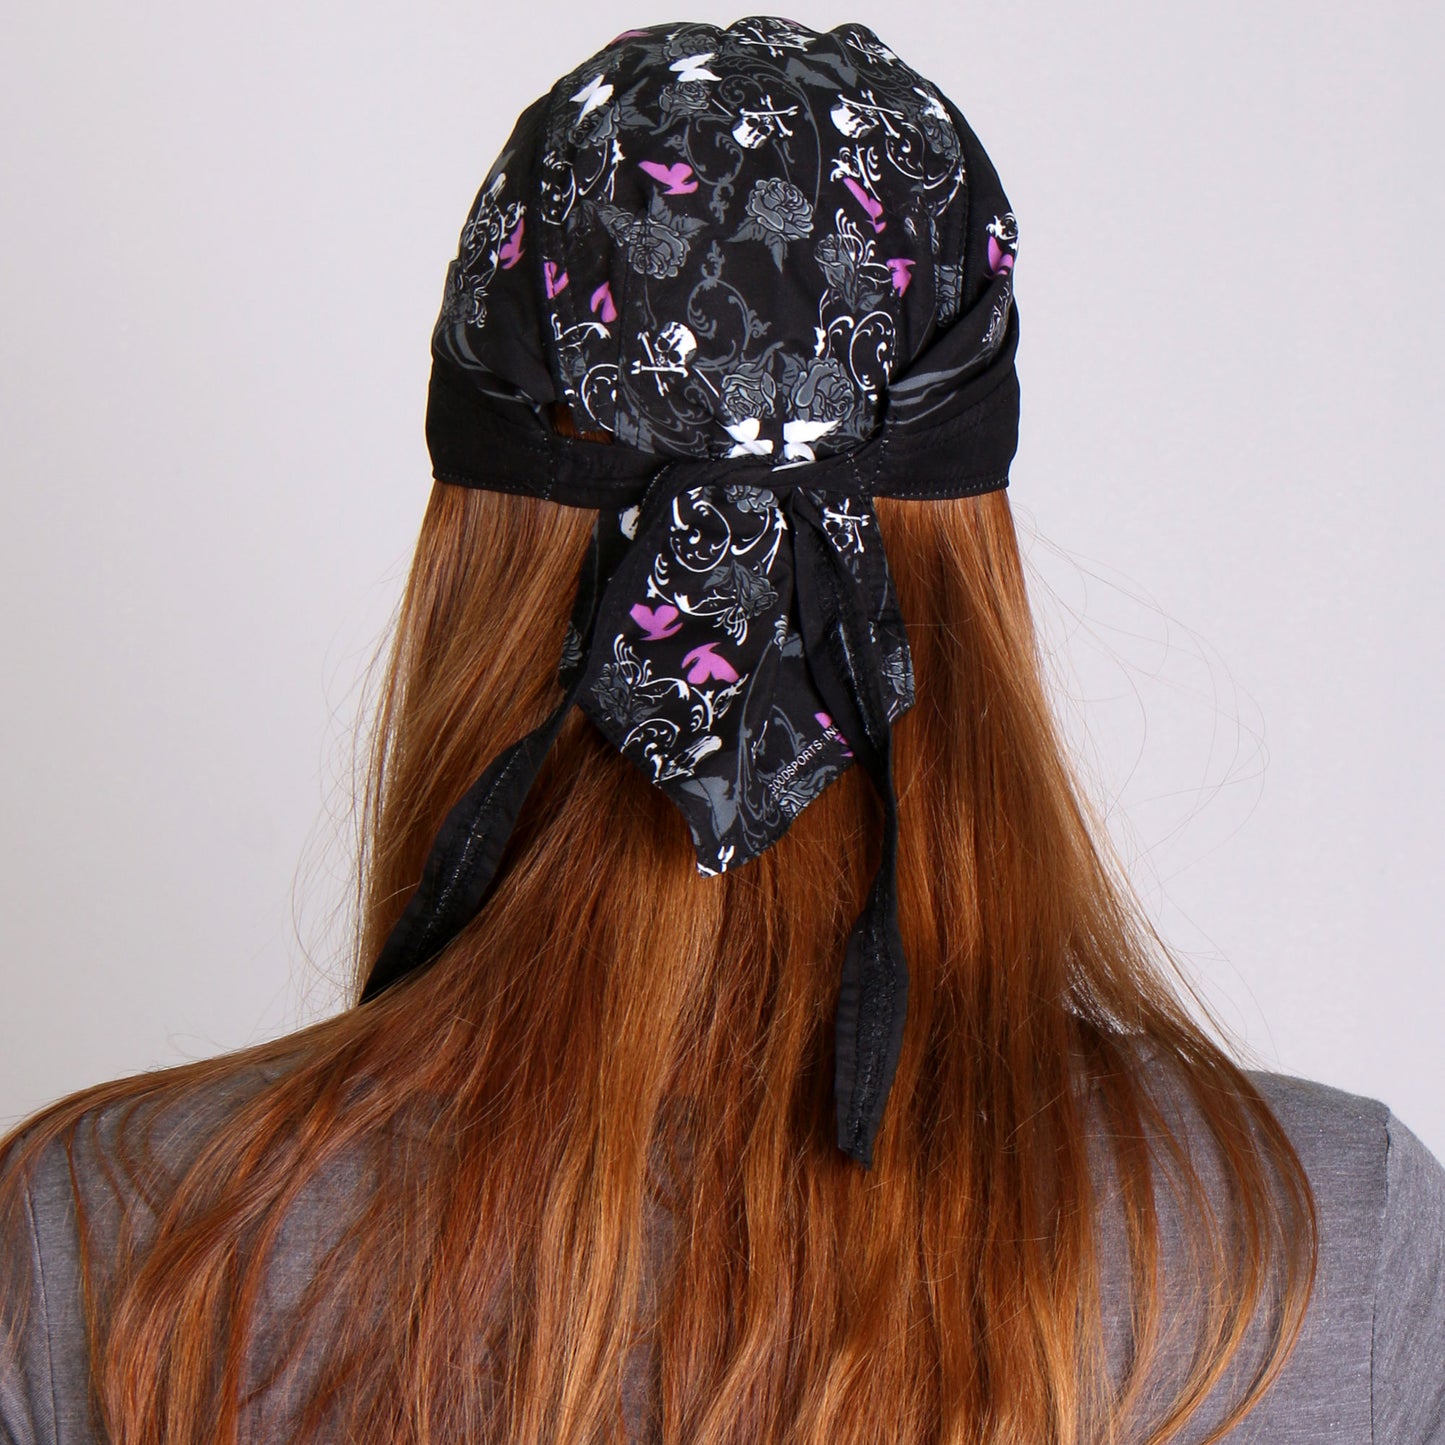 Hot Leathers HWH1022 Lady Rider Stud Headwrap